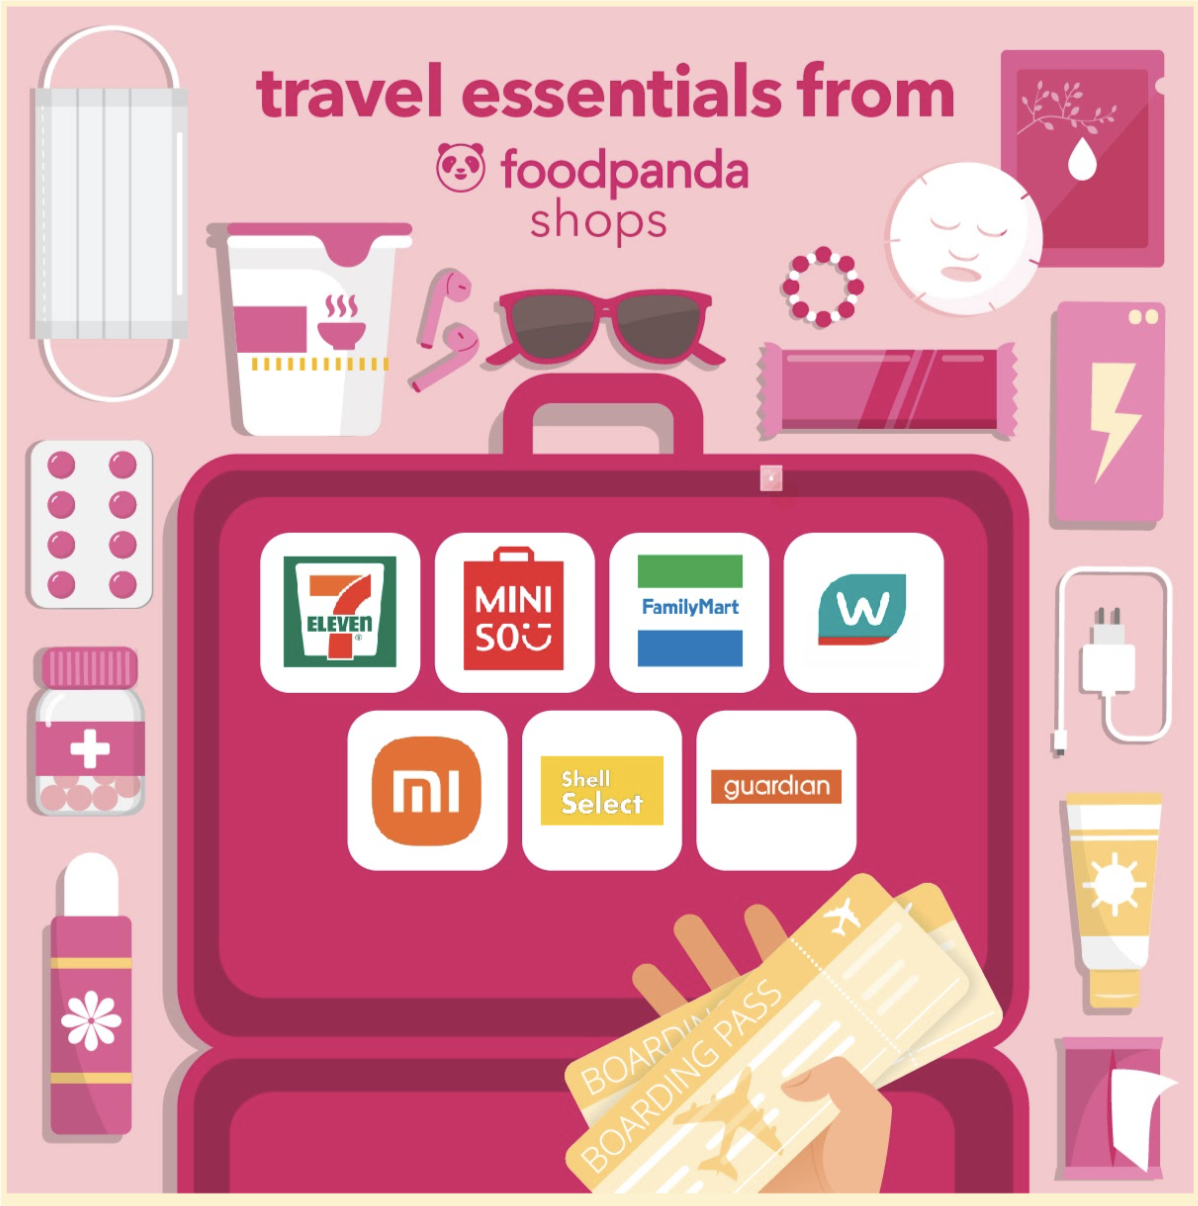 Year end travel must-haves: more than 2 million items to discover  on foodpanda shops for the Ultimate Fuss-Free Packing List